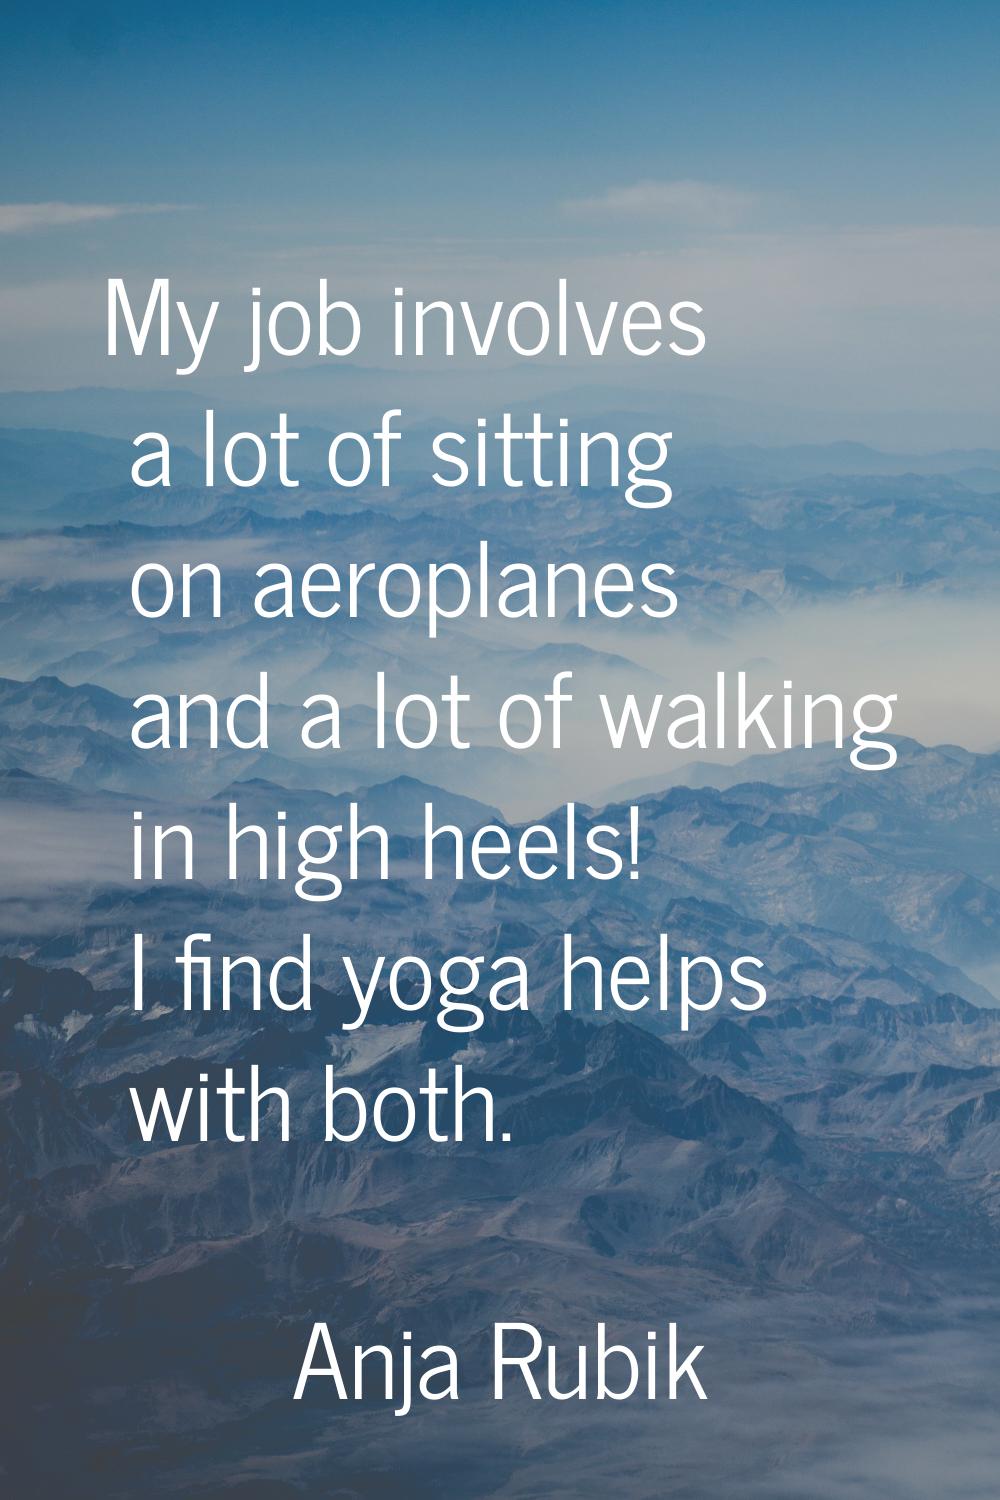 My job involves a lot of sitting on aeroplanes and a lot of walking in high heels! I find yoga help